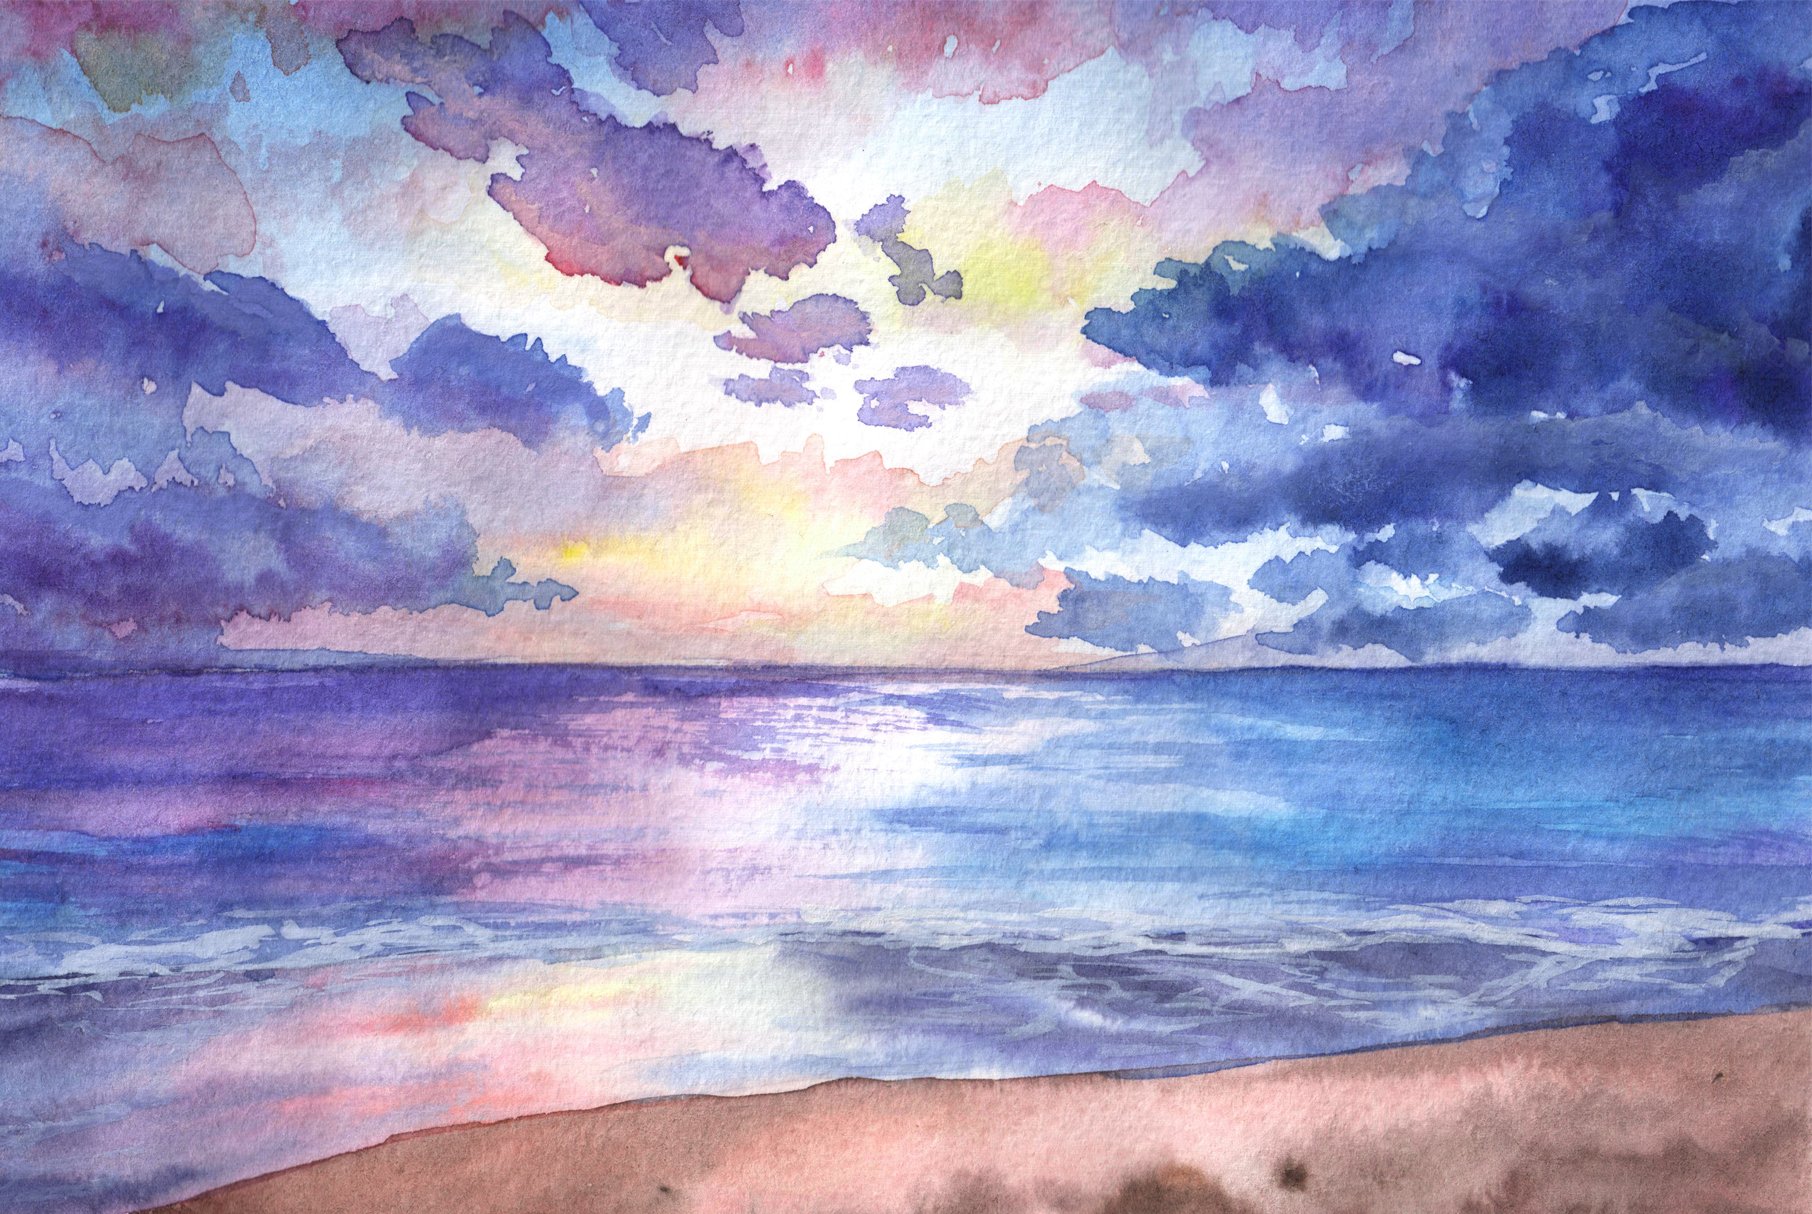 Suunset & Sunrise. Watercolor sketch preview image.